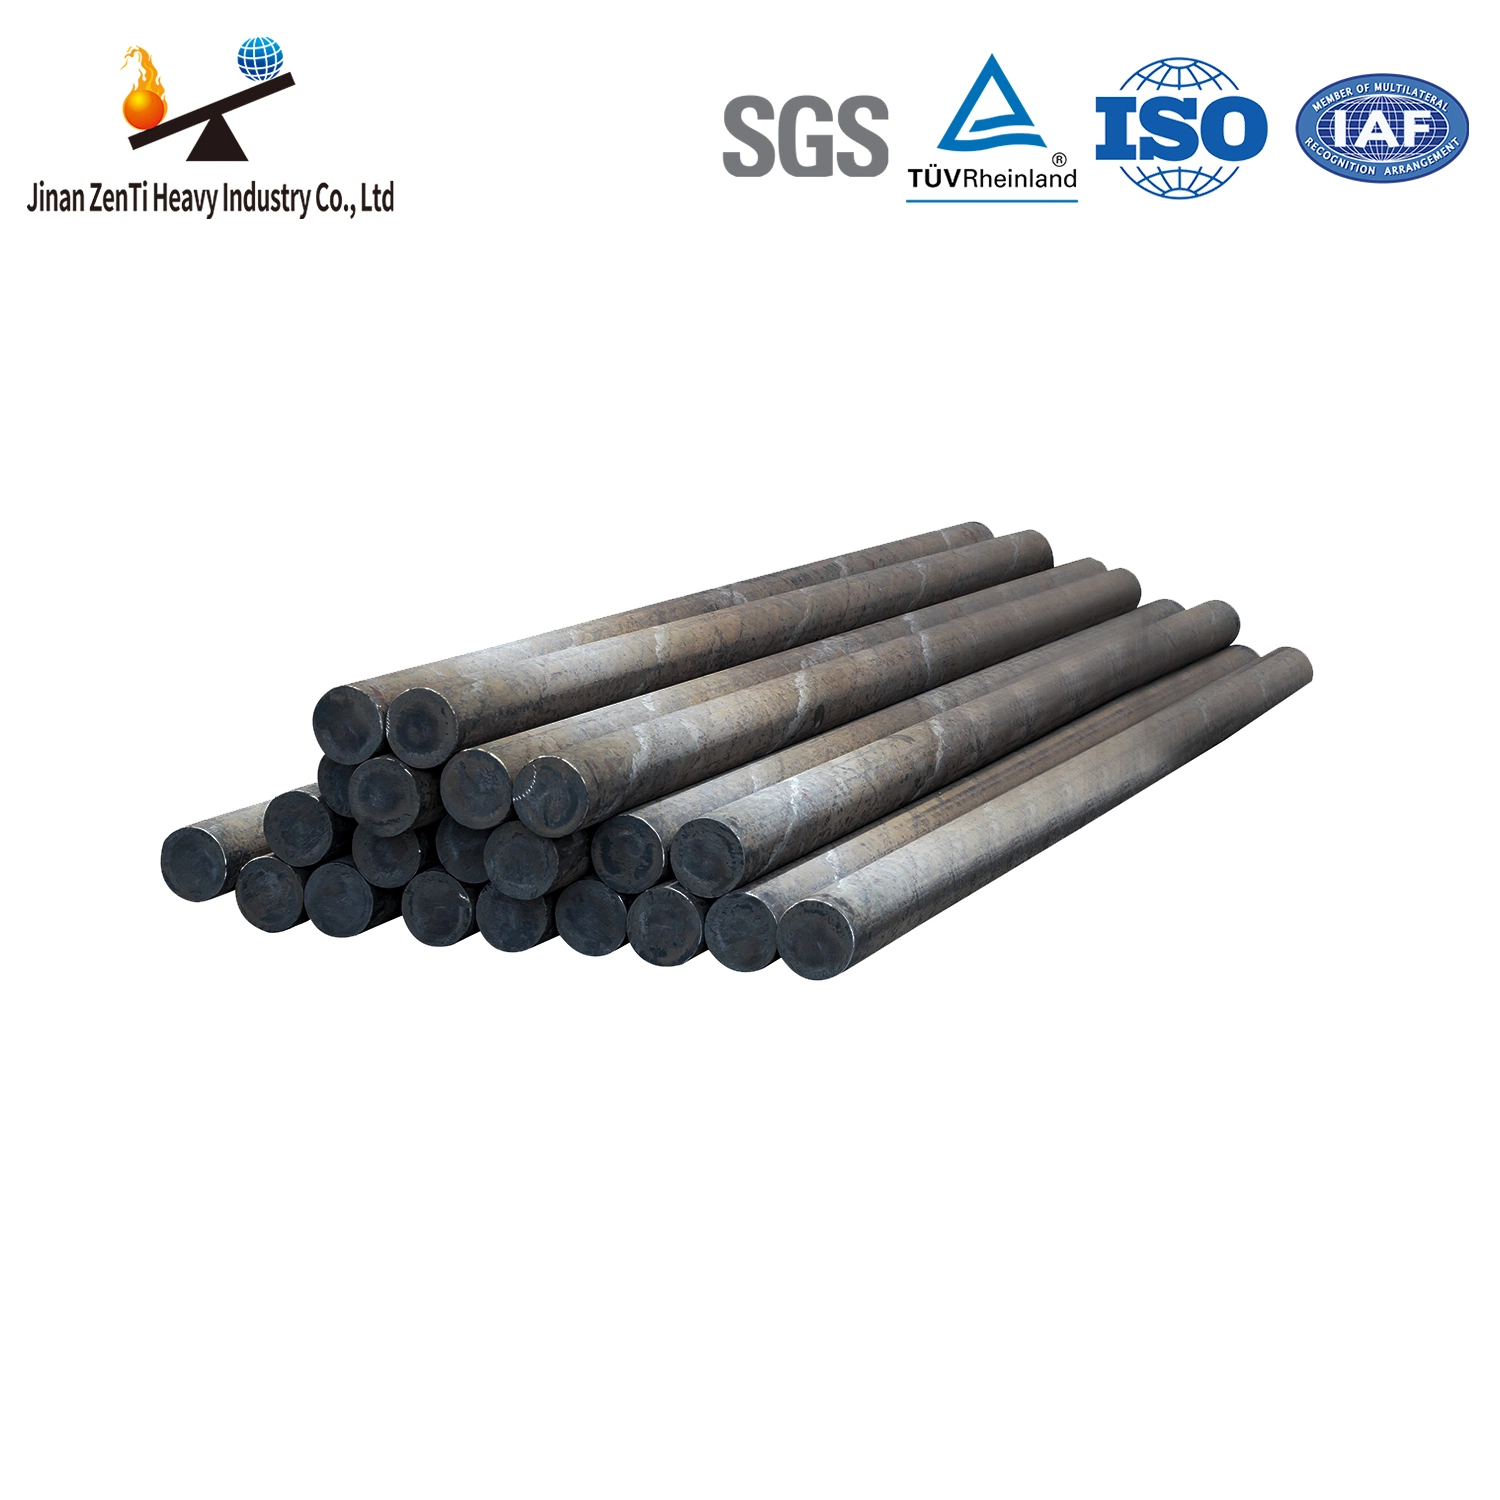 Quality Hot Sale Cheap and Fine Grinding Steel Rod Bar for Cement Concrete Chemical Metallurgical Industry Power Station